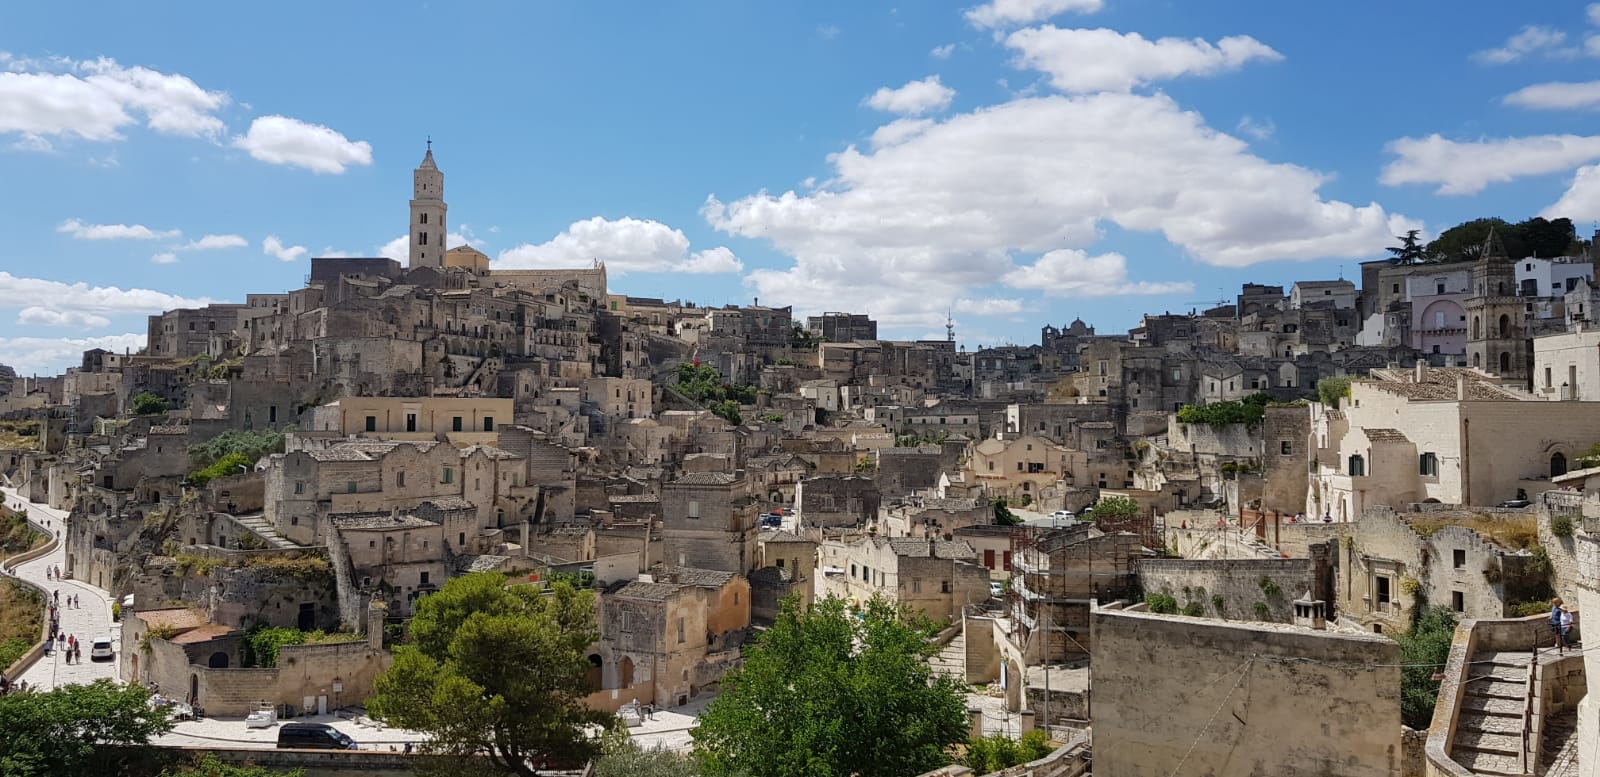 Old houses in Matera South Italy